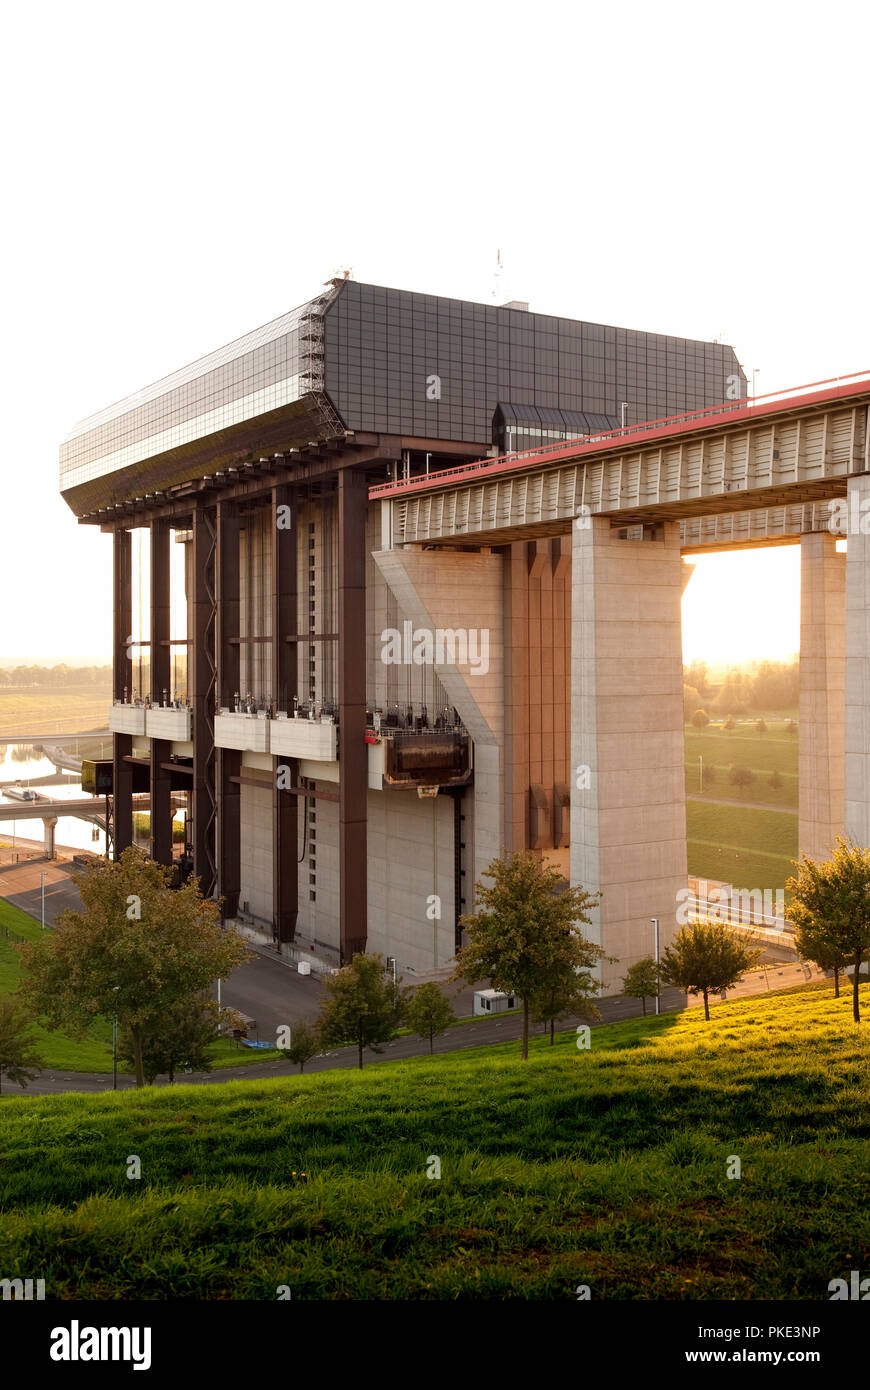 The boat lift of Strépy-Thieu on the Canal du Centre, located on the border of Strépy-Bracquegnies and Thieu (Belgium, 03/10/2011) Stock Photo